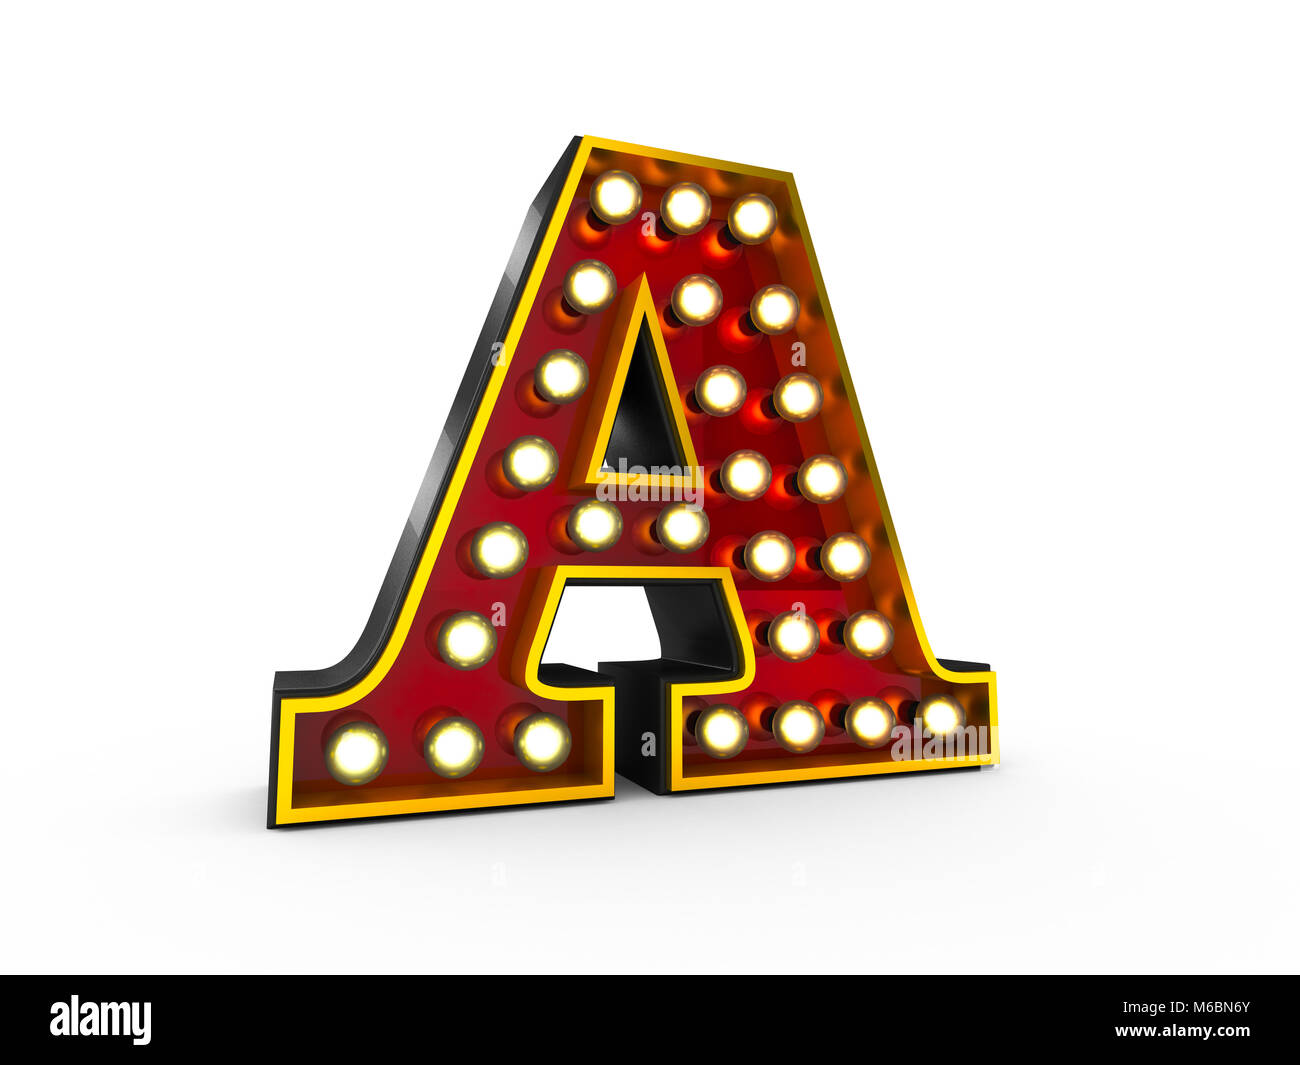 High quality 3D illustration of the letter A in Broadway style with light bulbs illuminating it over white background Stock Photo